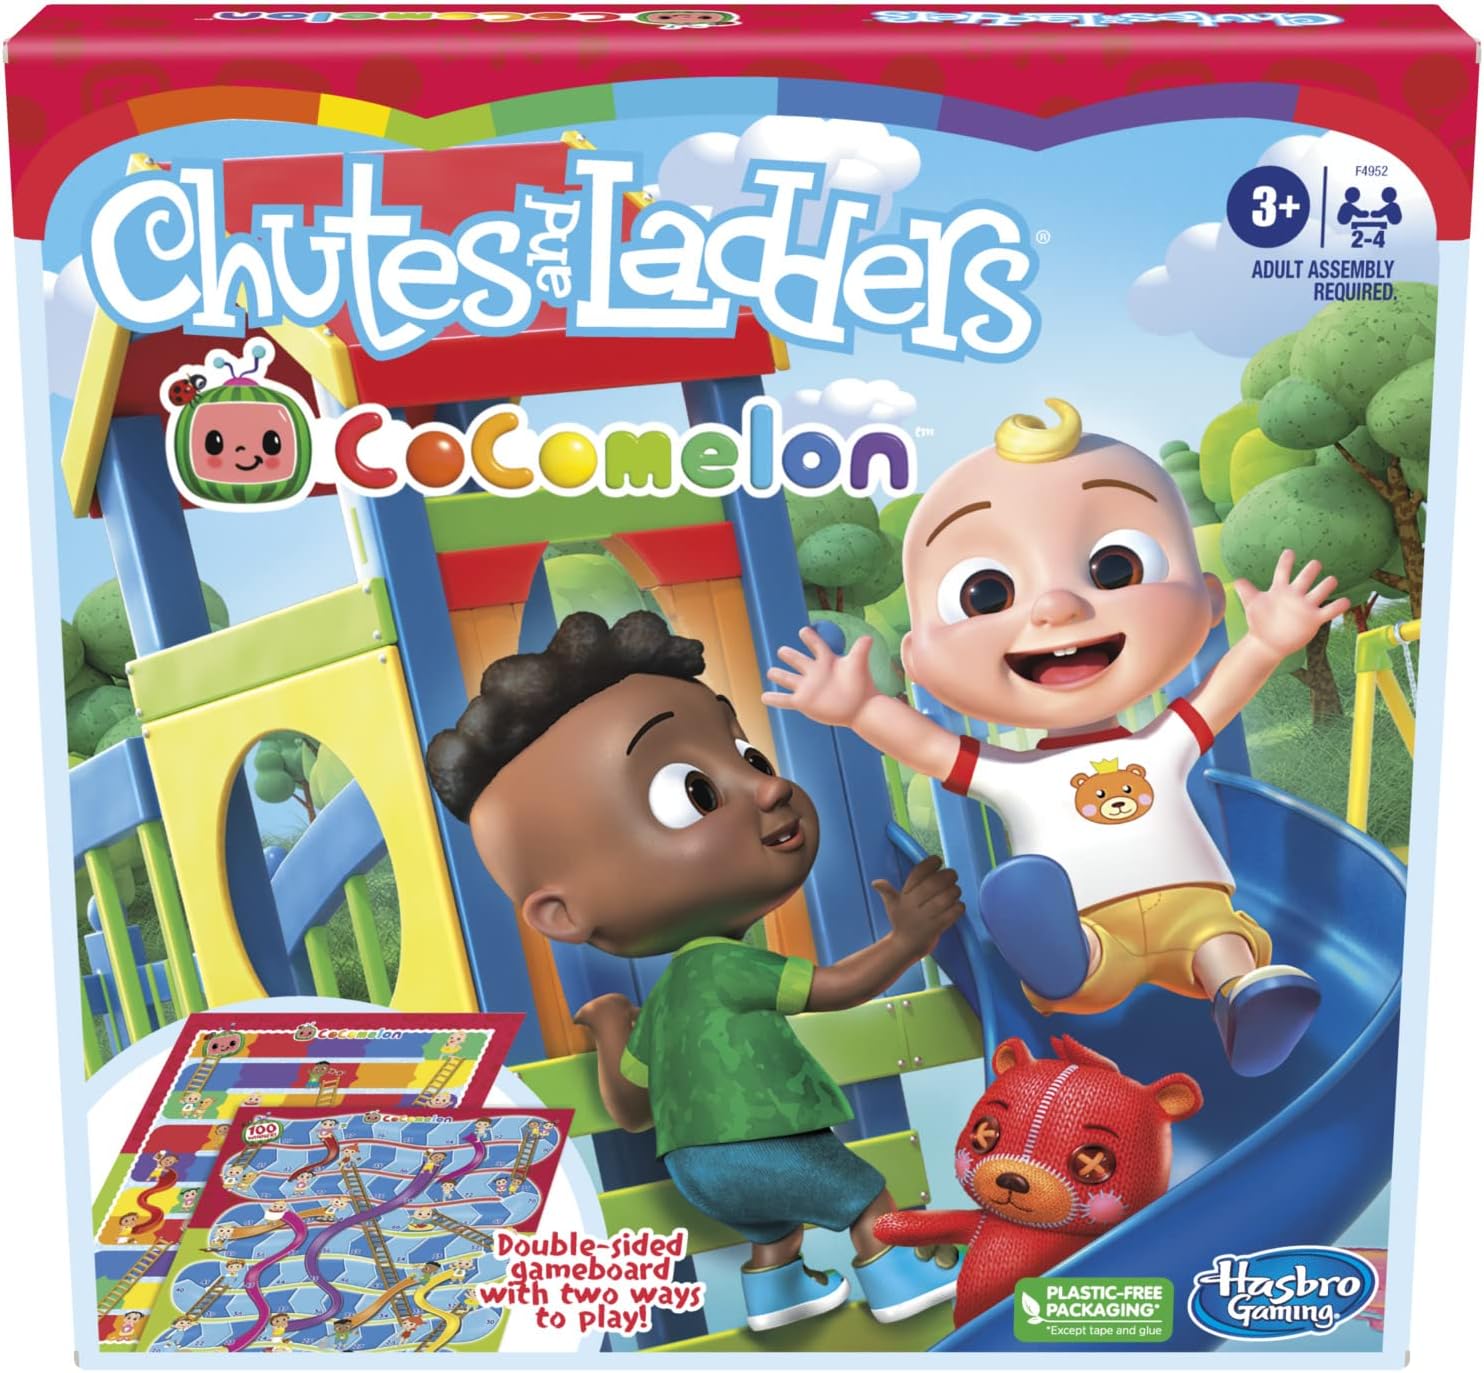 Chutes and Ladders: CoComelon Edition